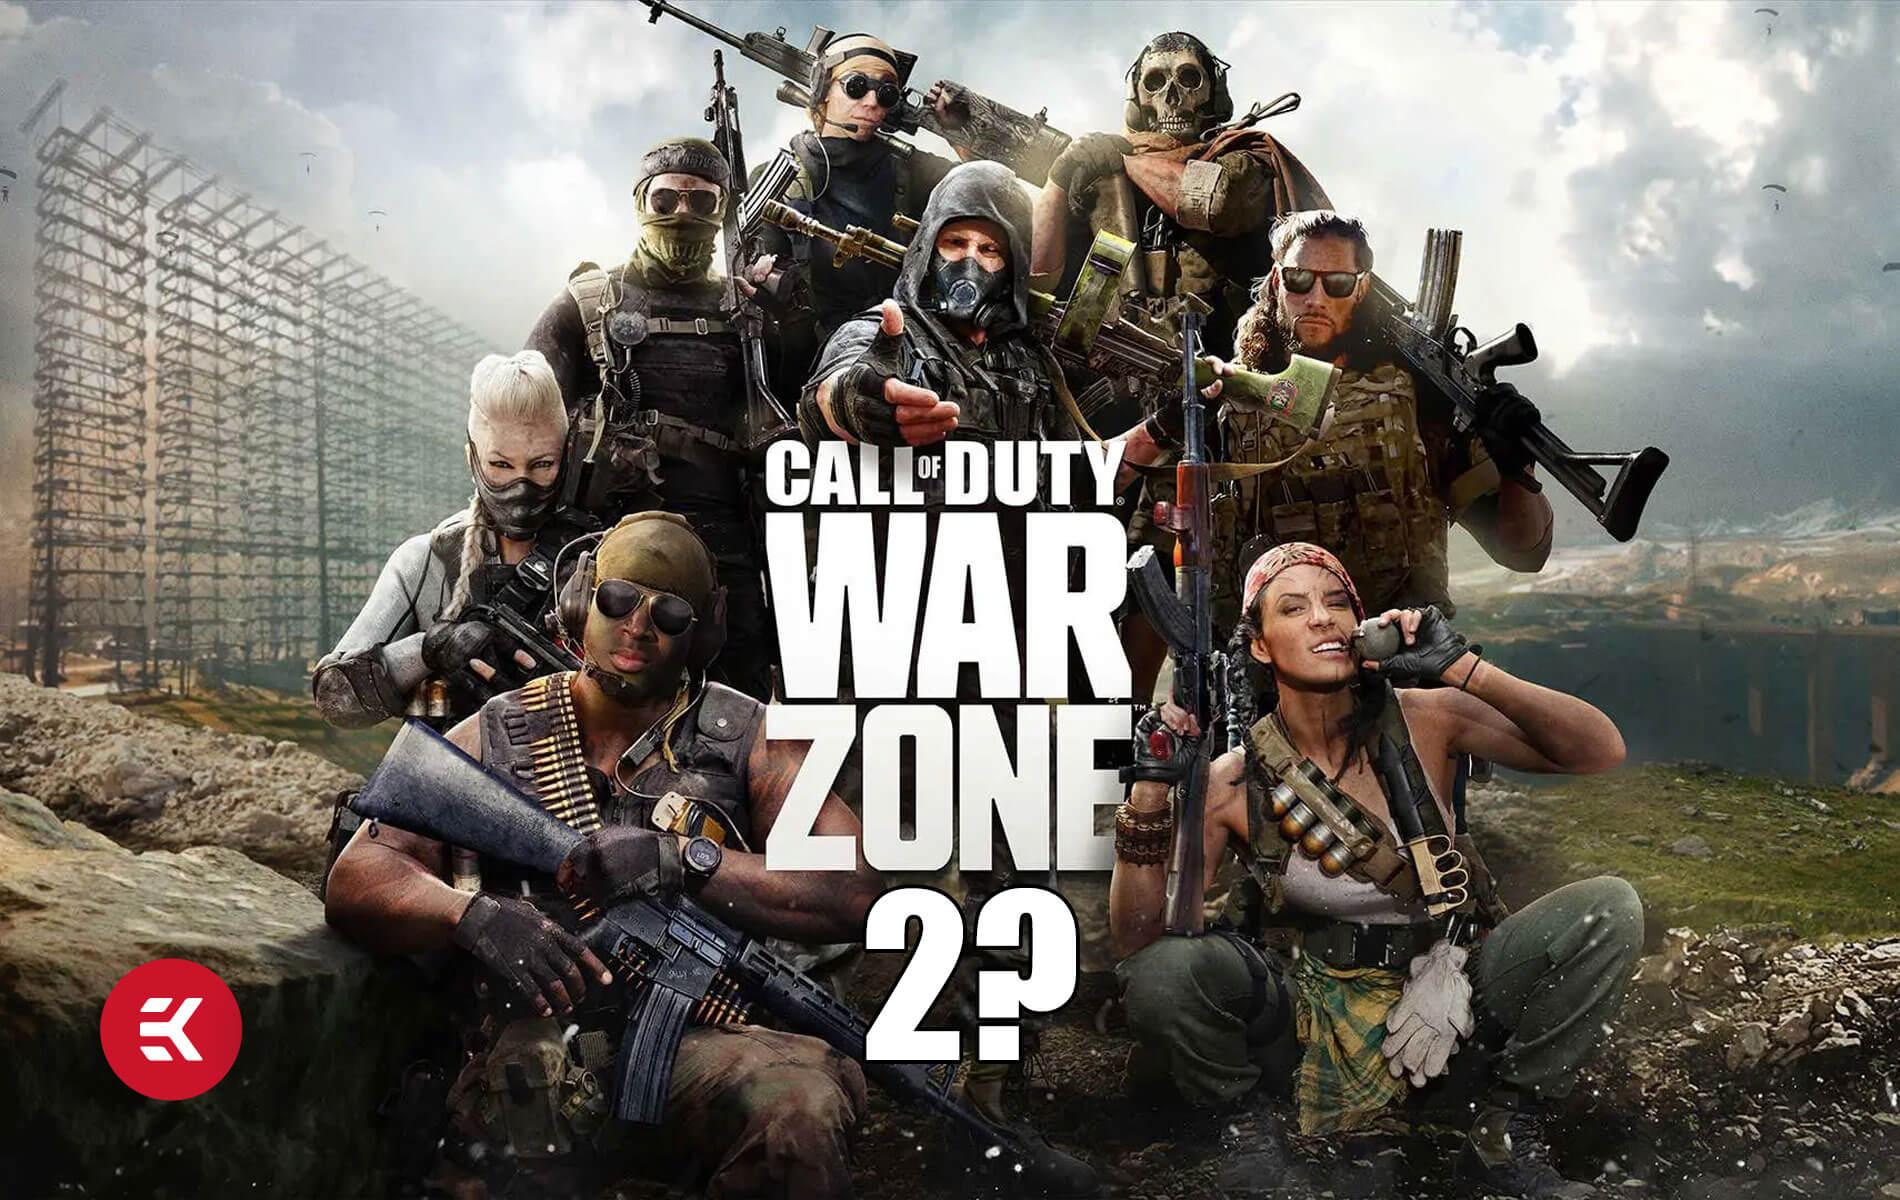 Call of Duty: Warzone 2 Info - Release Date, Rumors, Platforms, and More